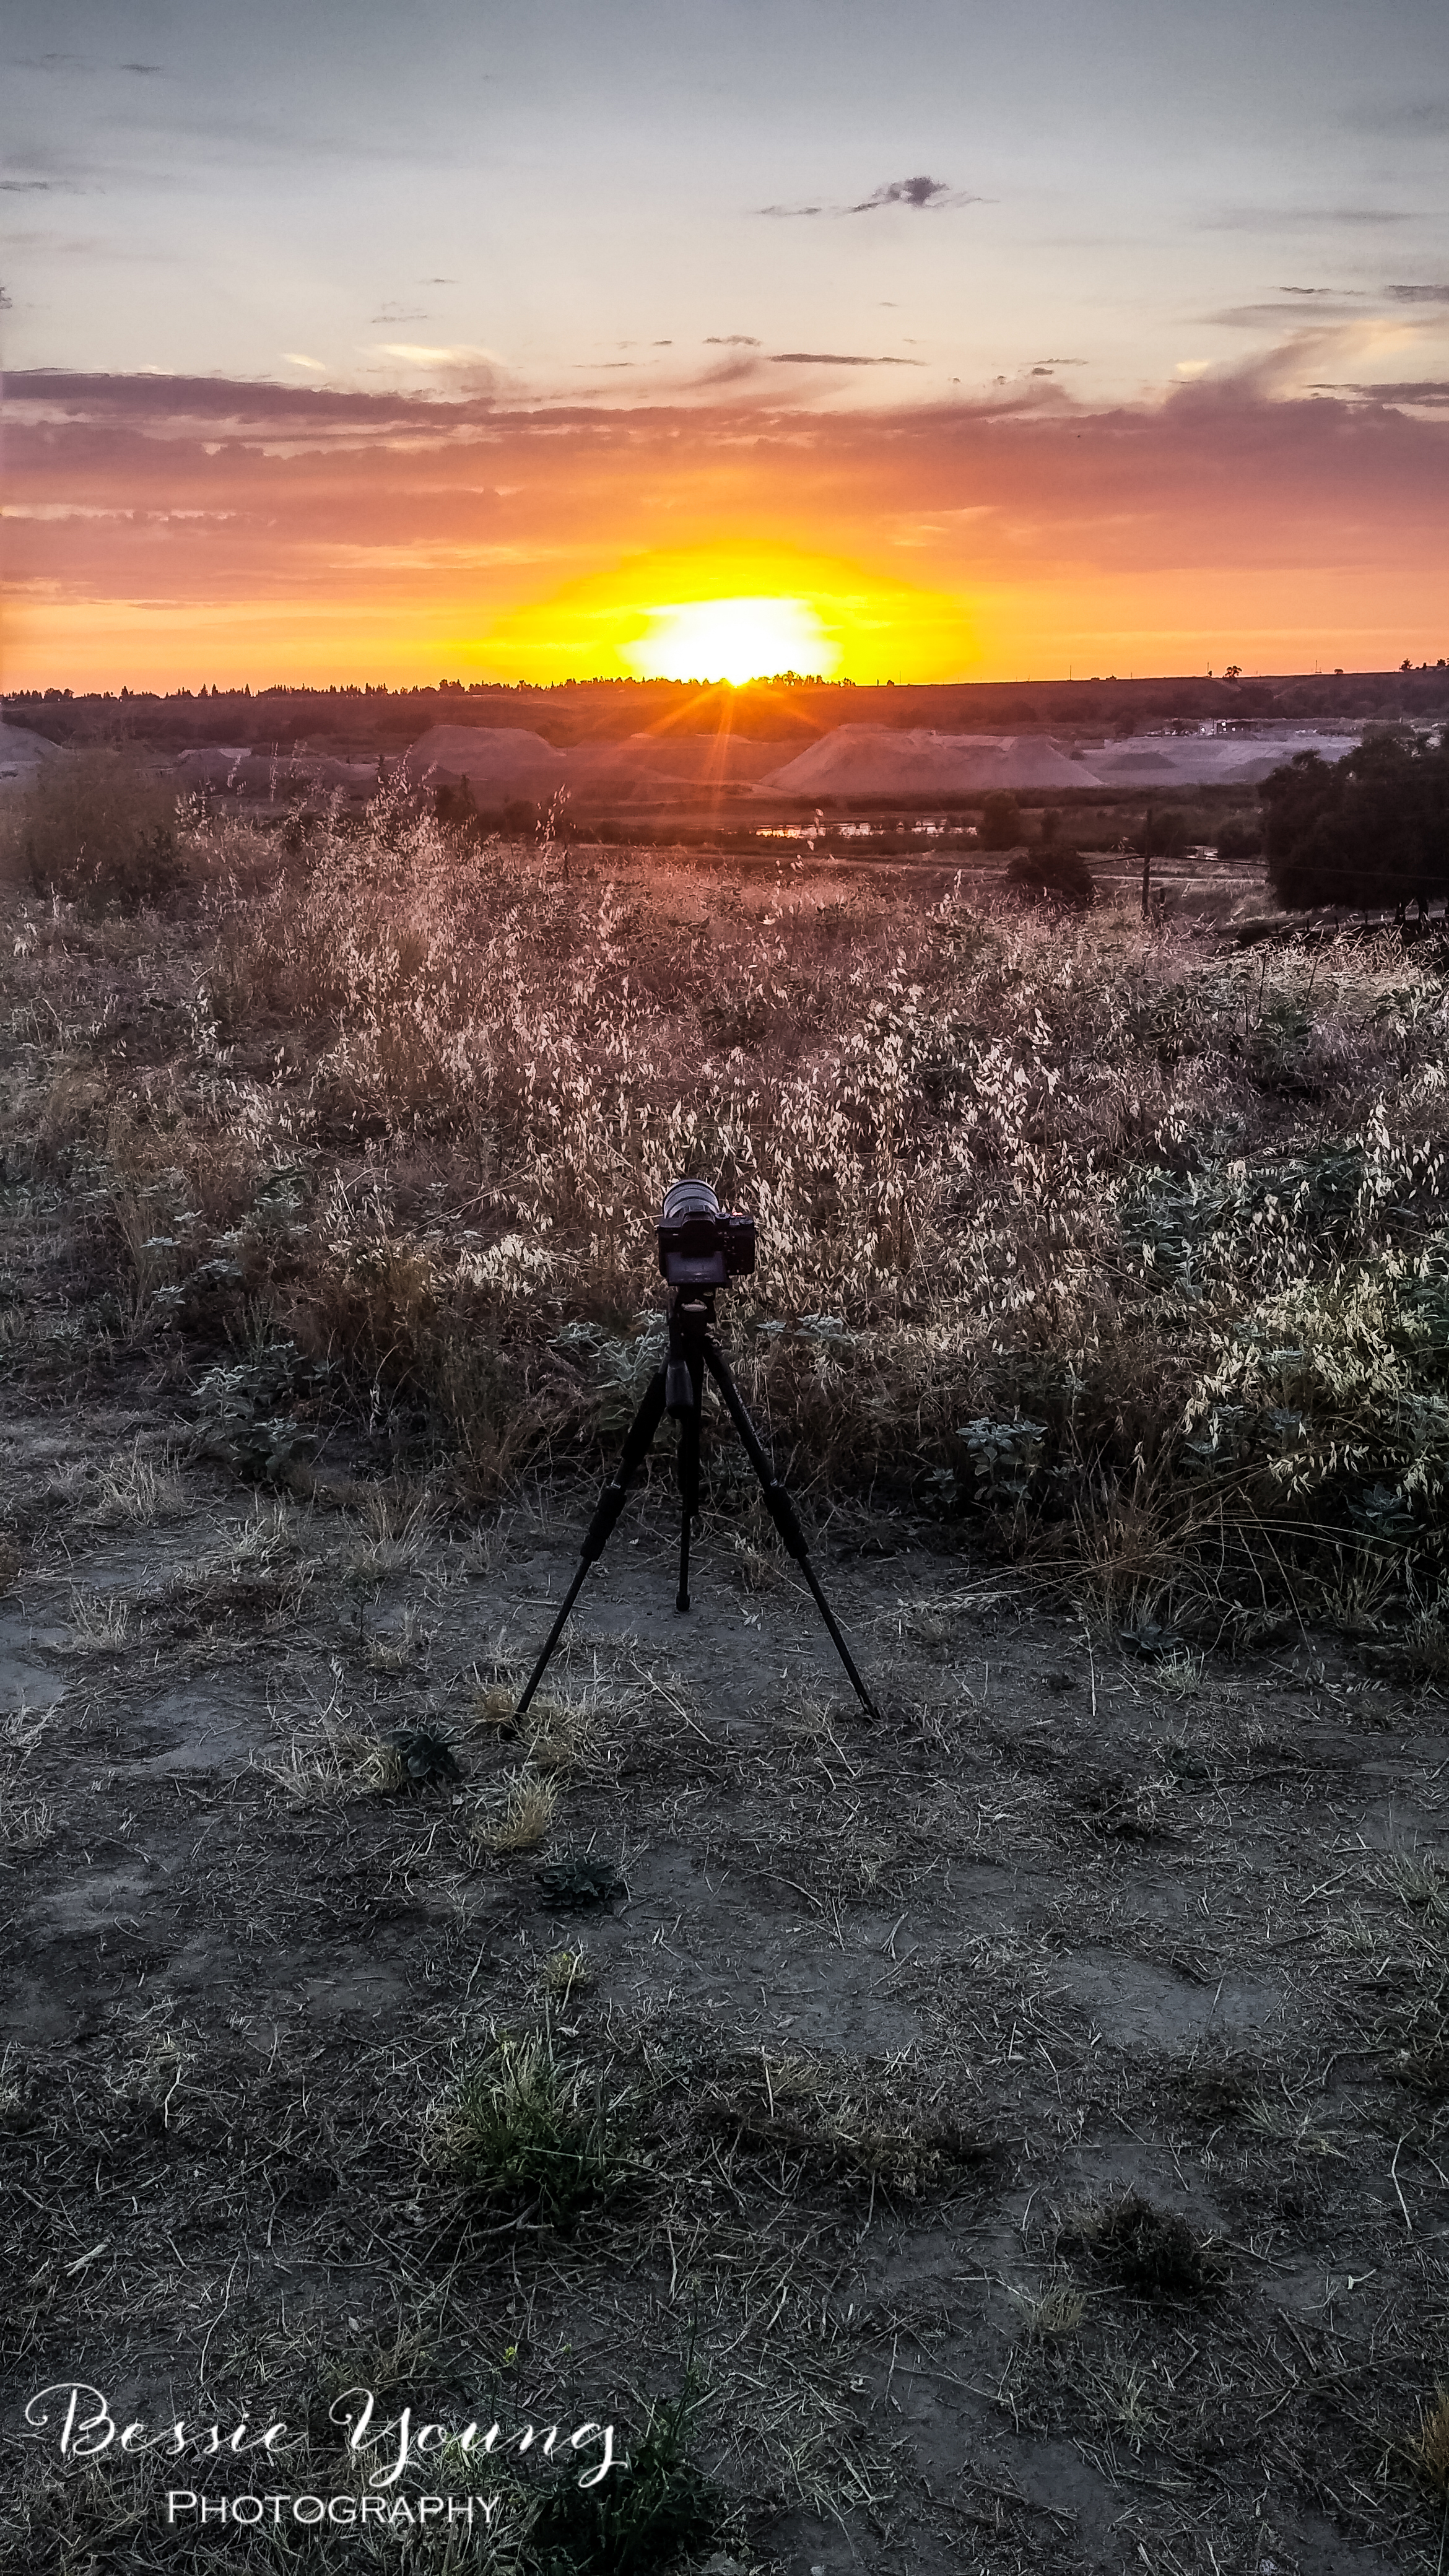 Sunset Time Lapse Sony A7Rii - Woodward Park, Fresno- Bessie Young Photography.jpg